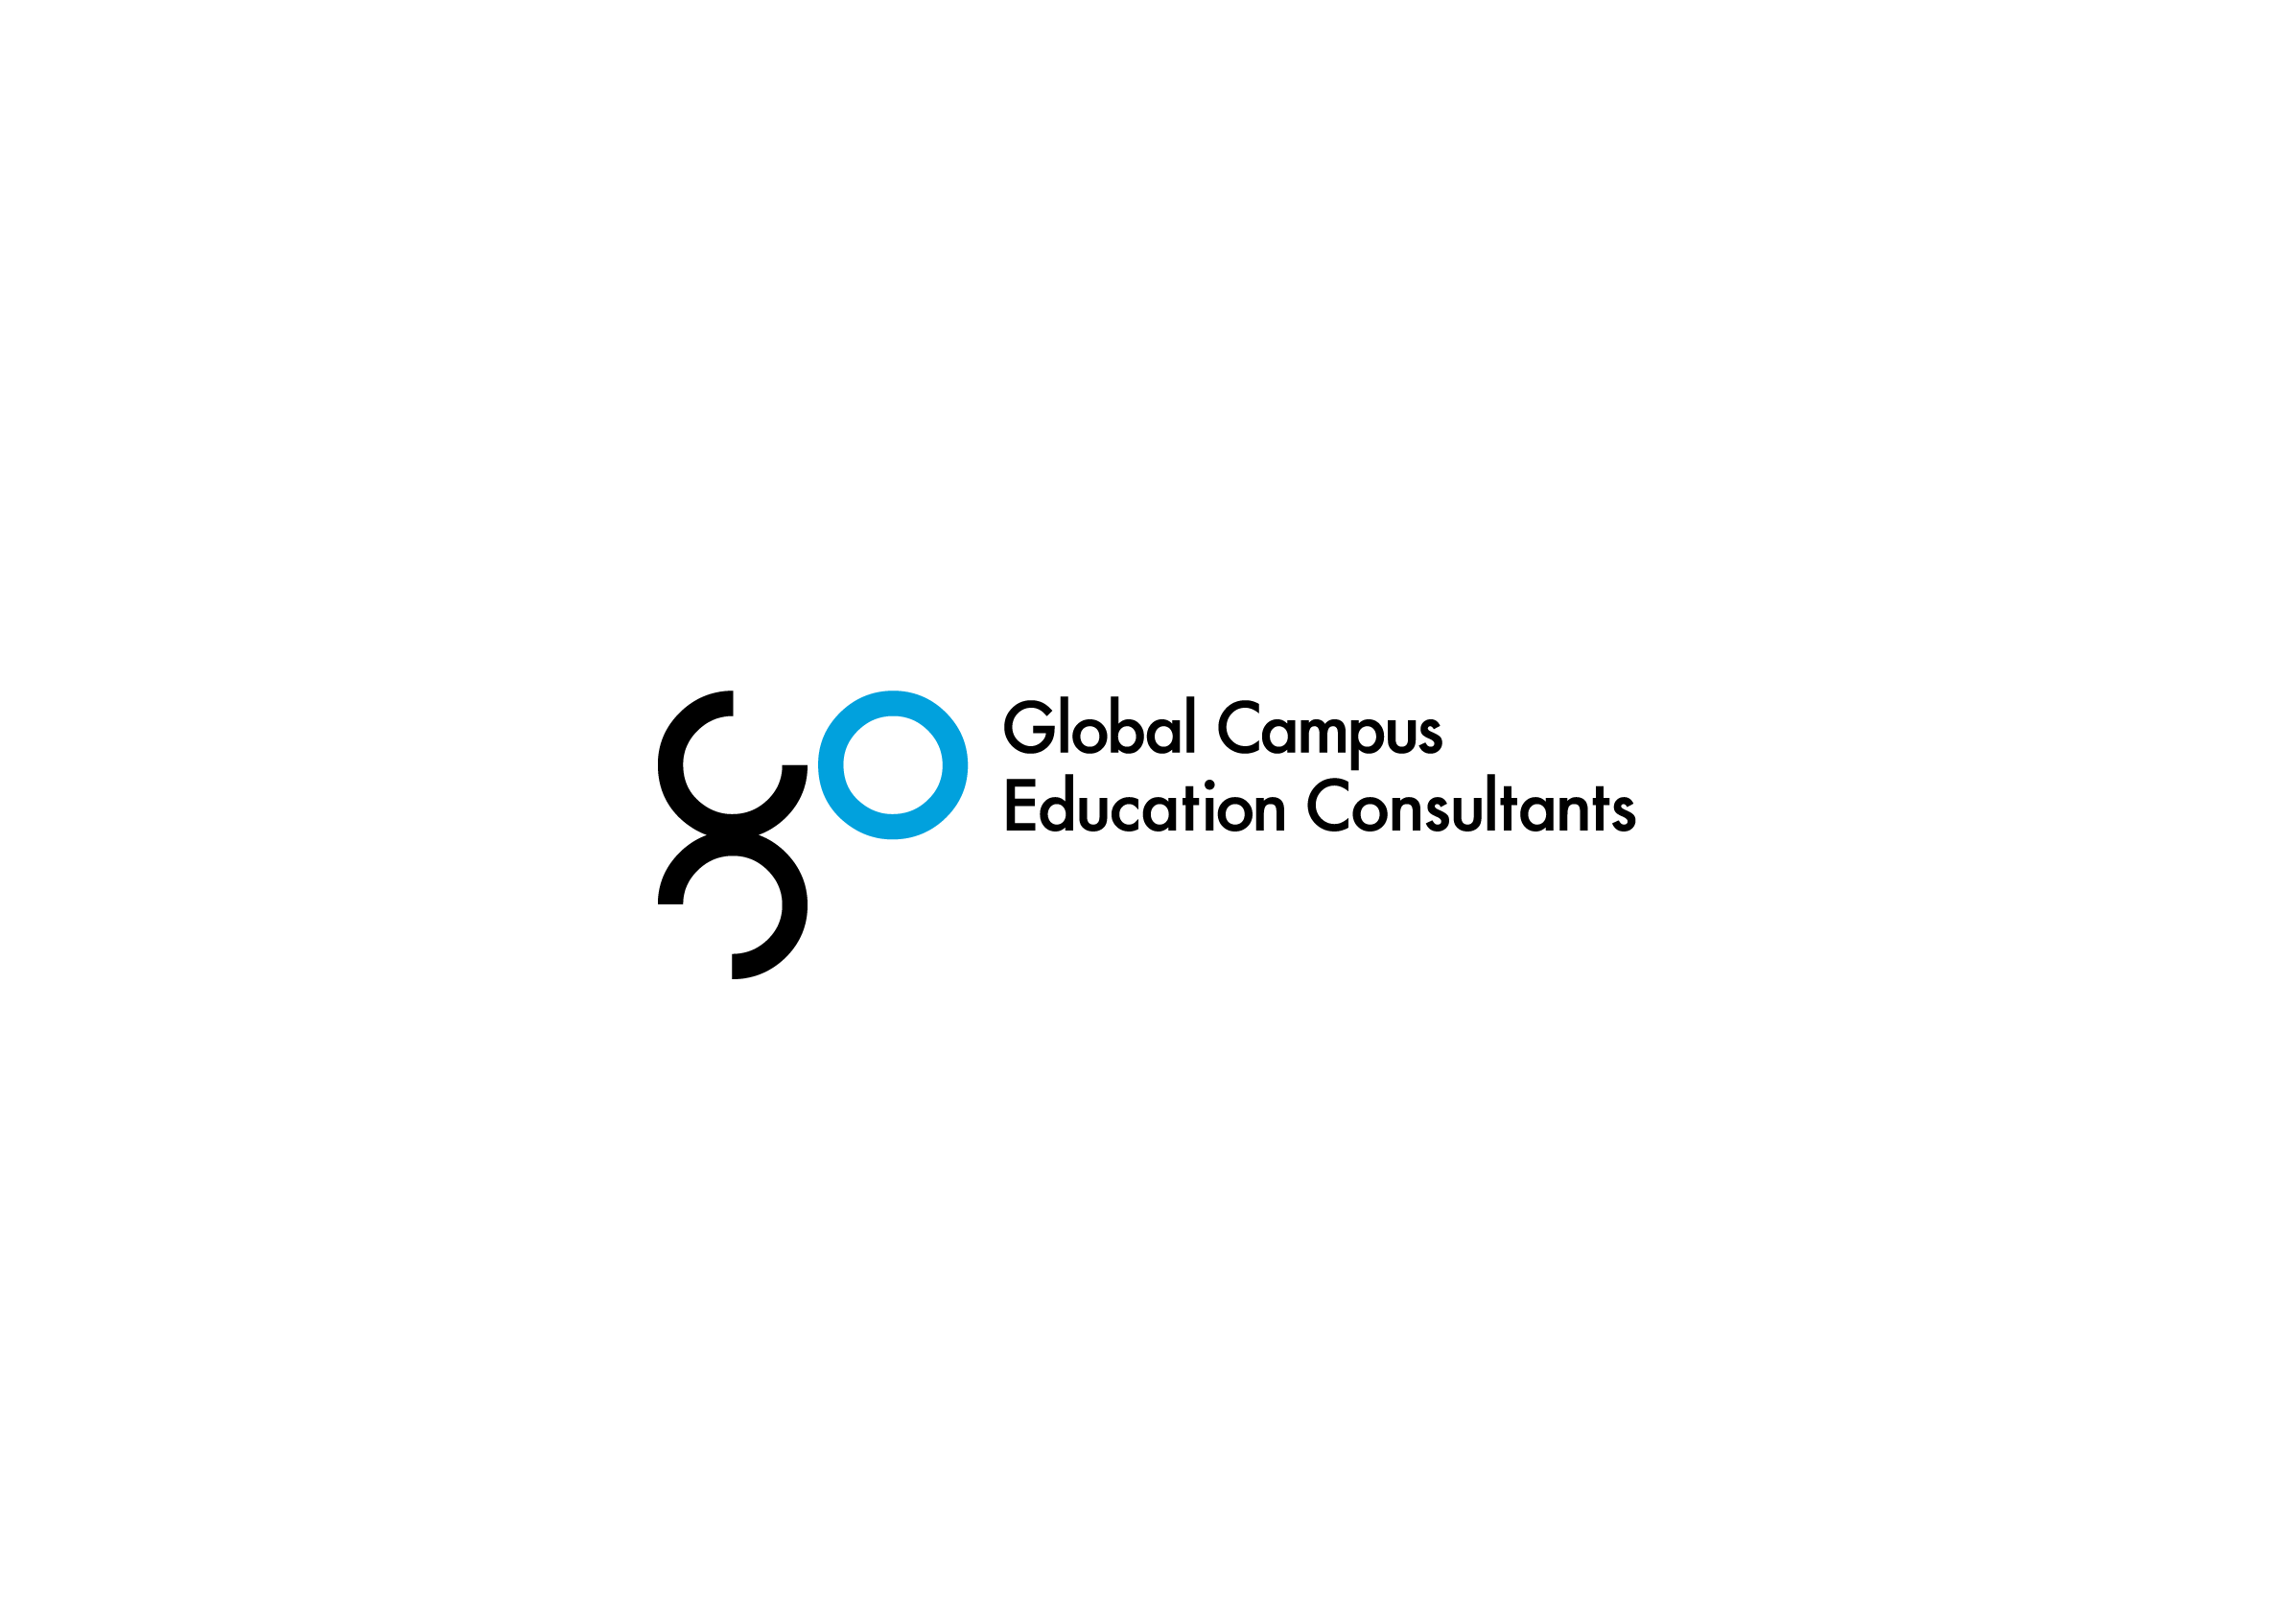 Logo for Global Campus Education Consultants, a student recruitment company by Ottawa Graphic Designer idApostle